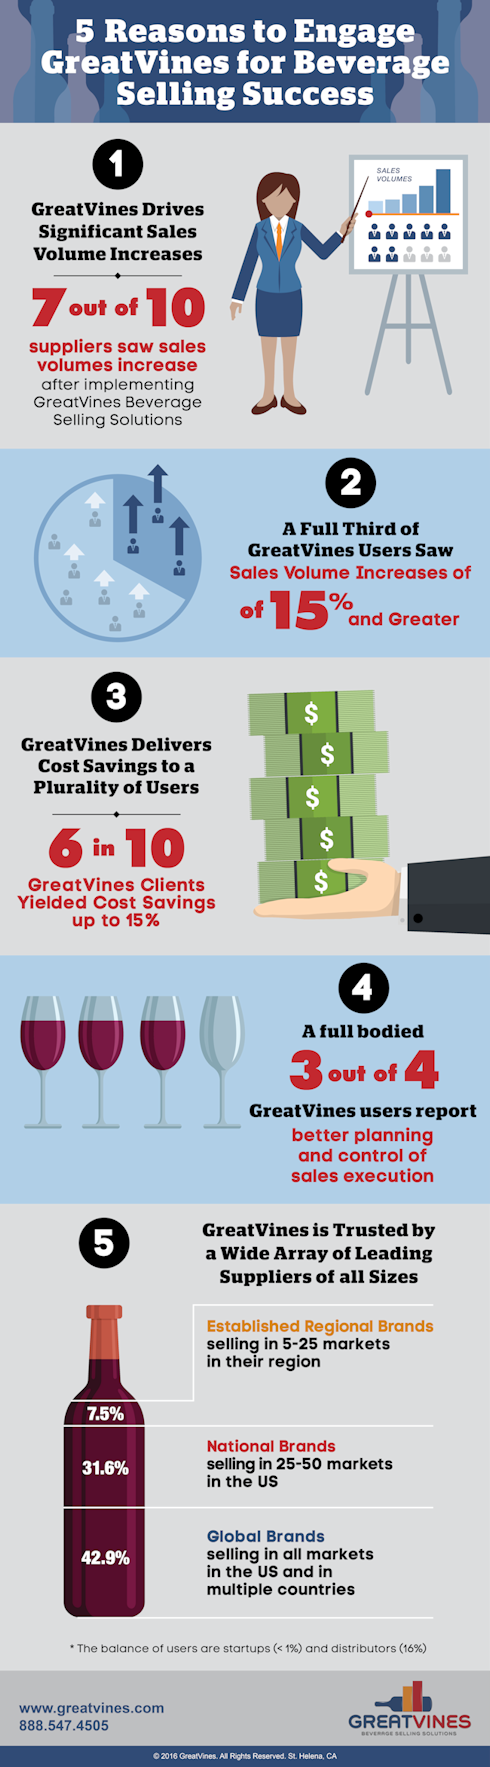 5 Reasons to Engage GreatVines - Infographic